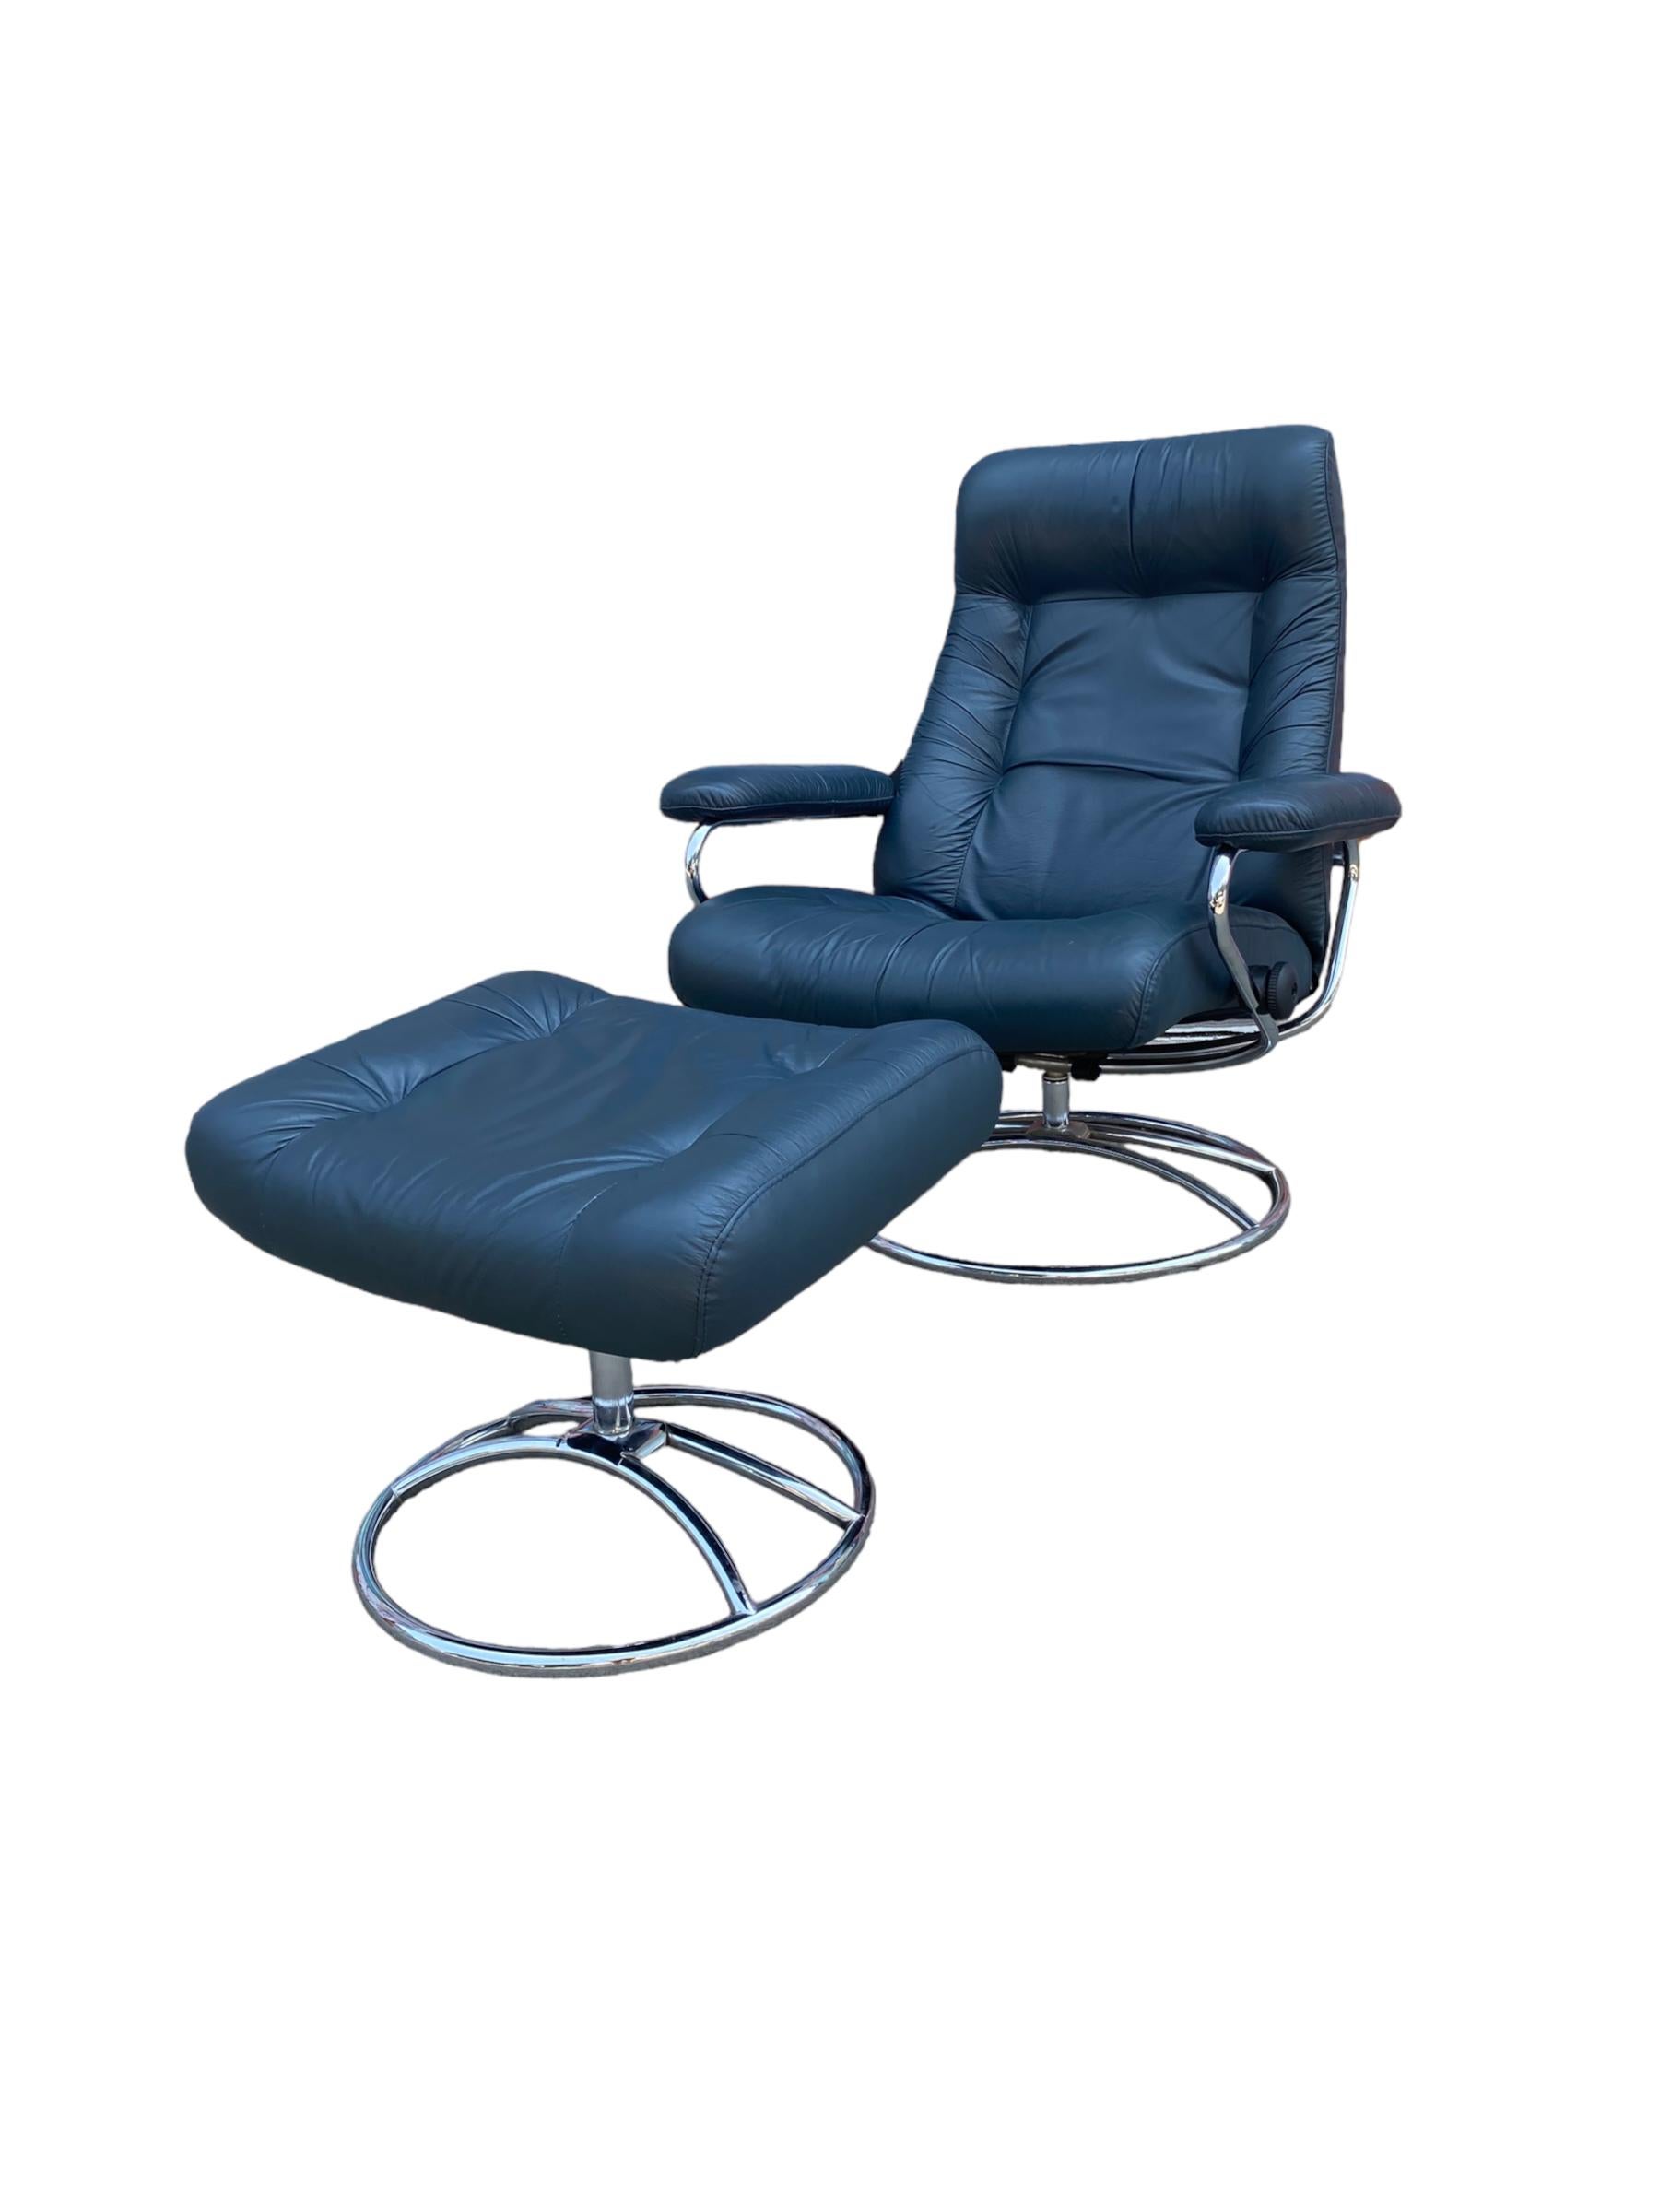 Ekornes Stressless reclining lounge chair and ottoman. Elegant midcentury Scandinavian design with tubular bent chrome frame and navy blue leather cushion. Lounge in comfort with this timeless design.